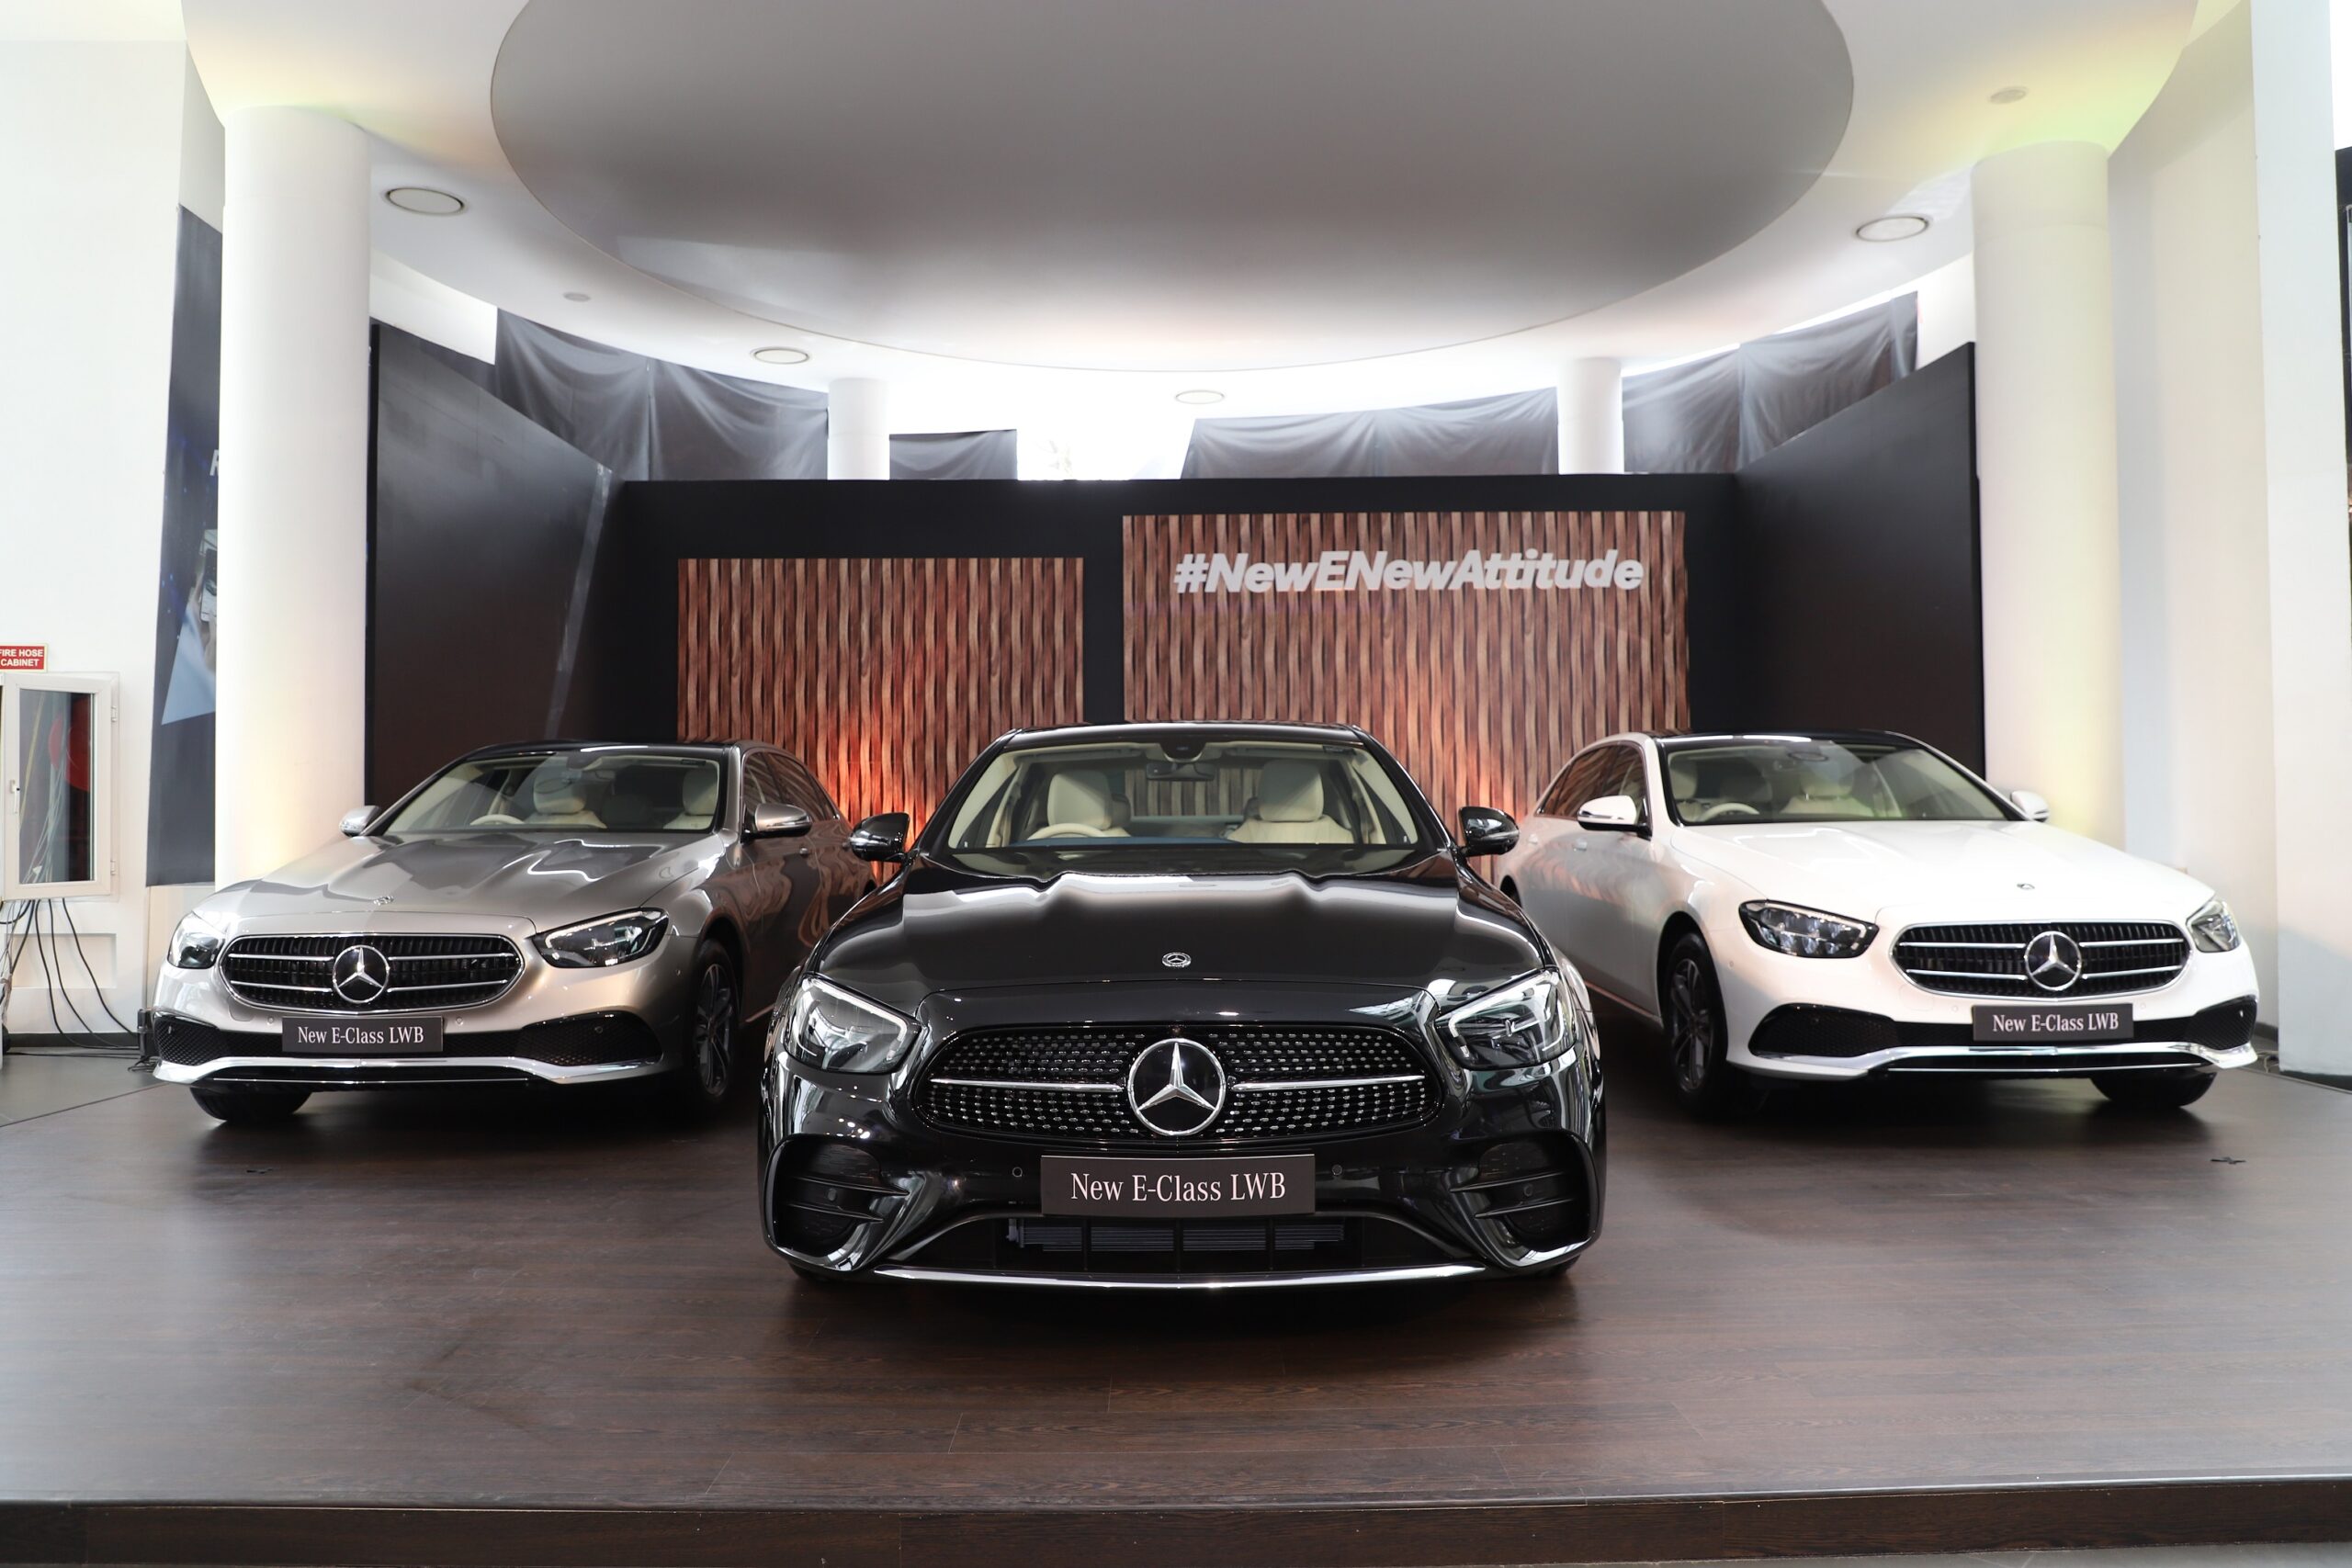 Mercedes-Benz India clocks strong growth in H1 2021